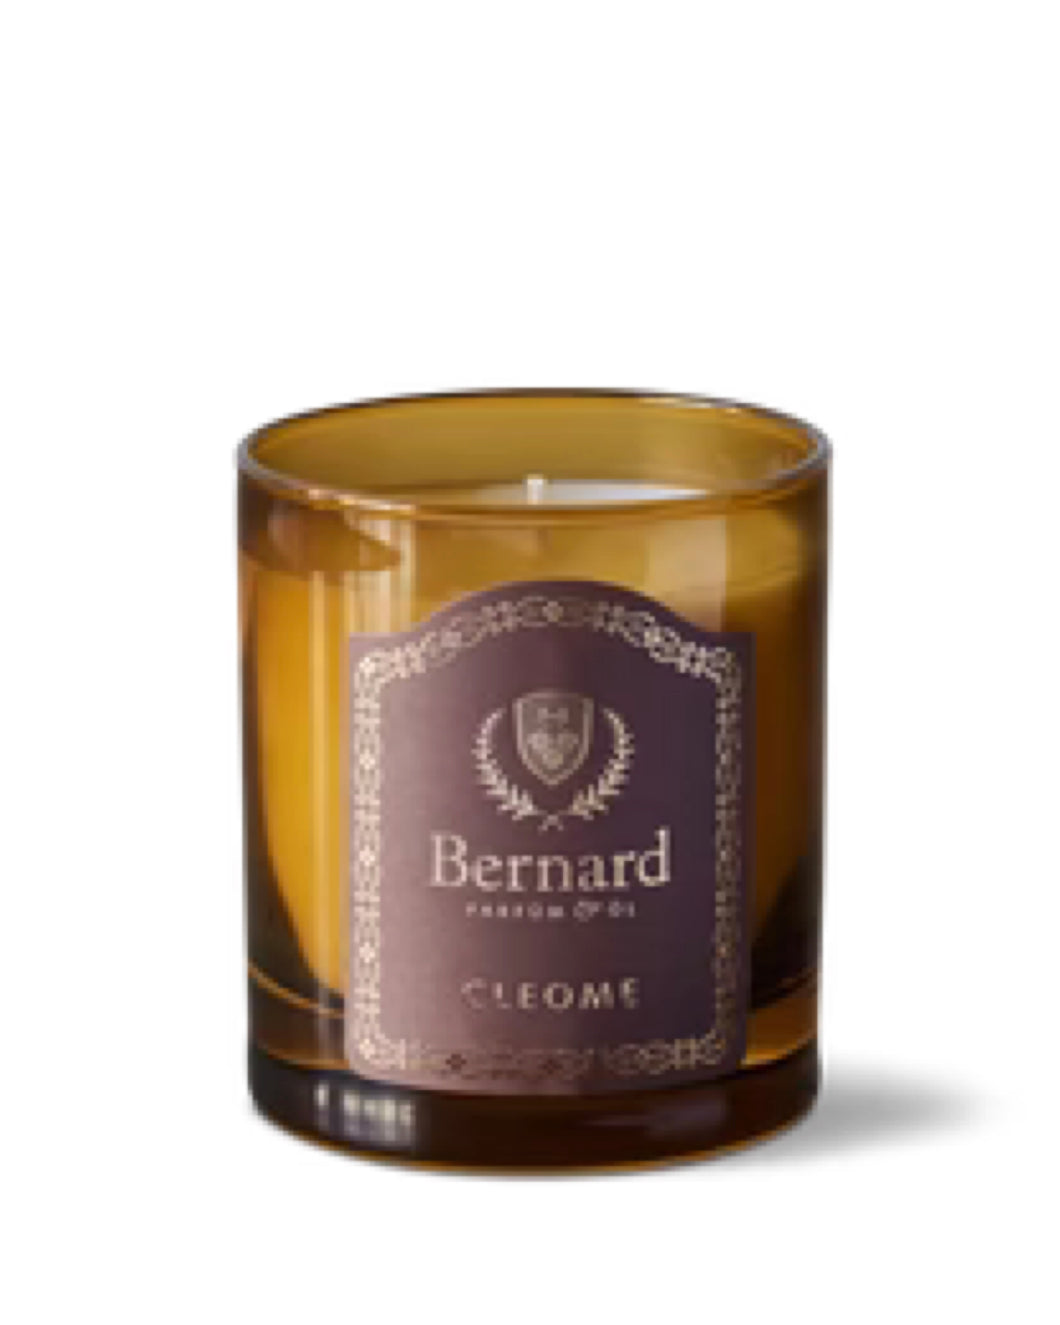 CLEOME CANDLE